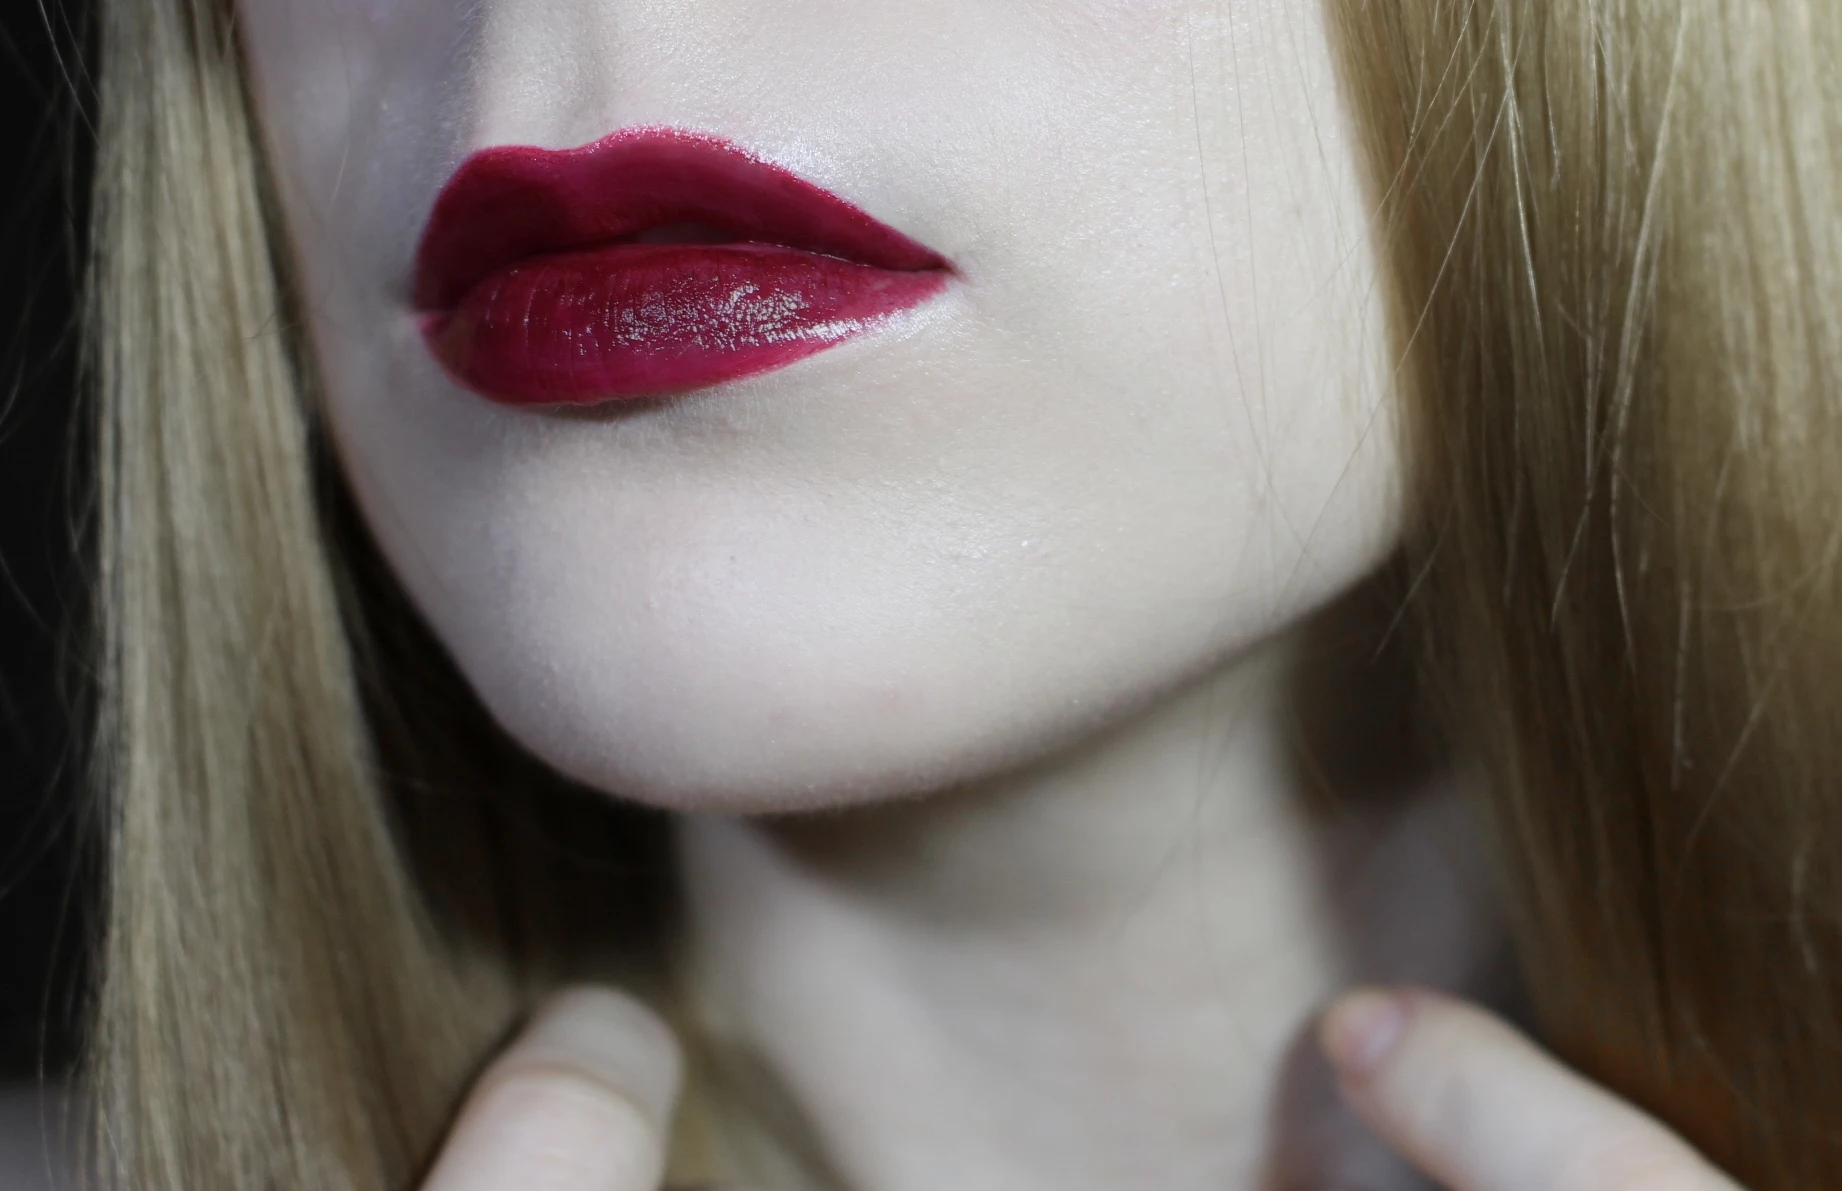 blonde woman with a dark red lip makeup